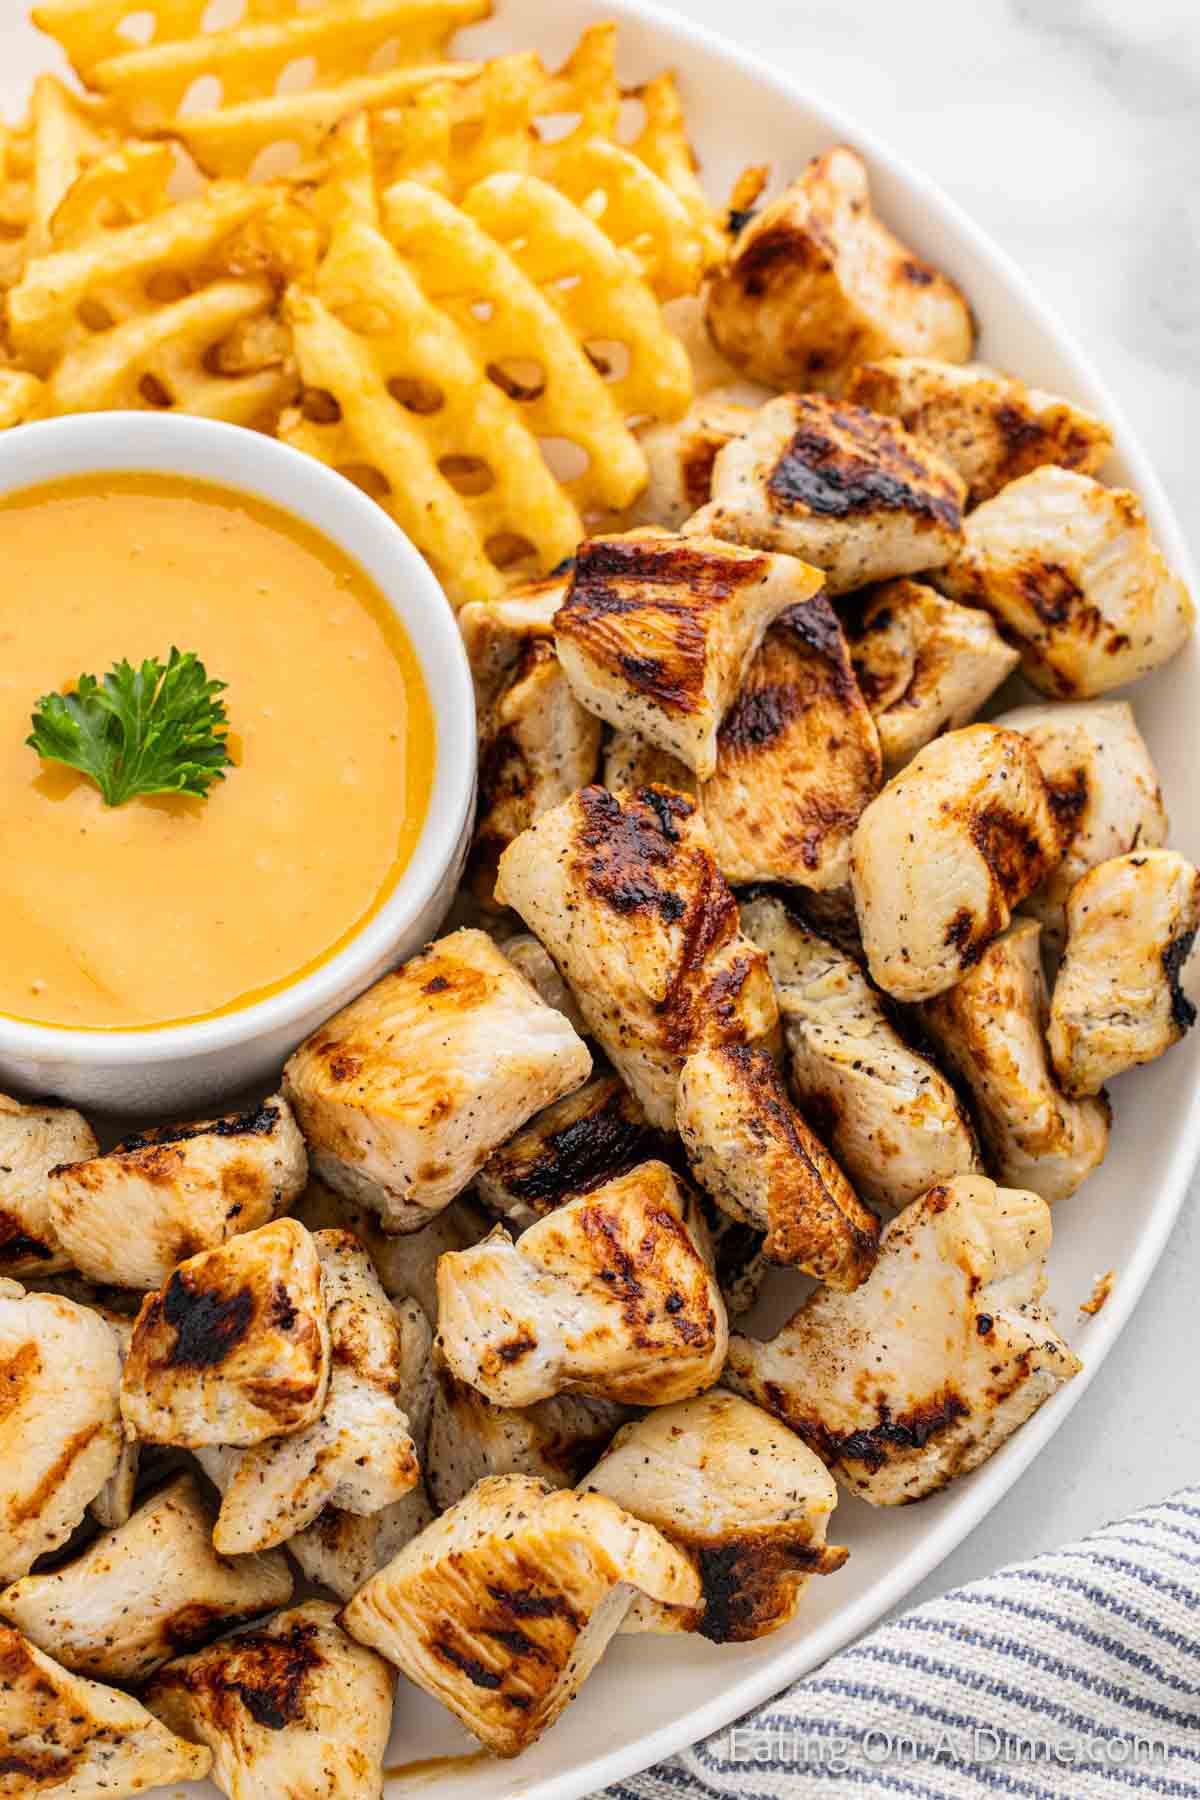 Grilled chicken nuggets on a platter with fries and dipping sauce